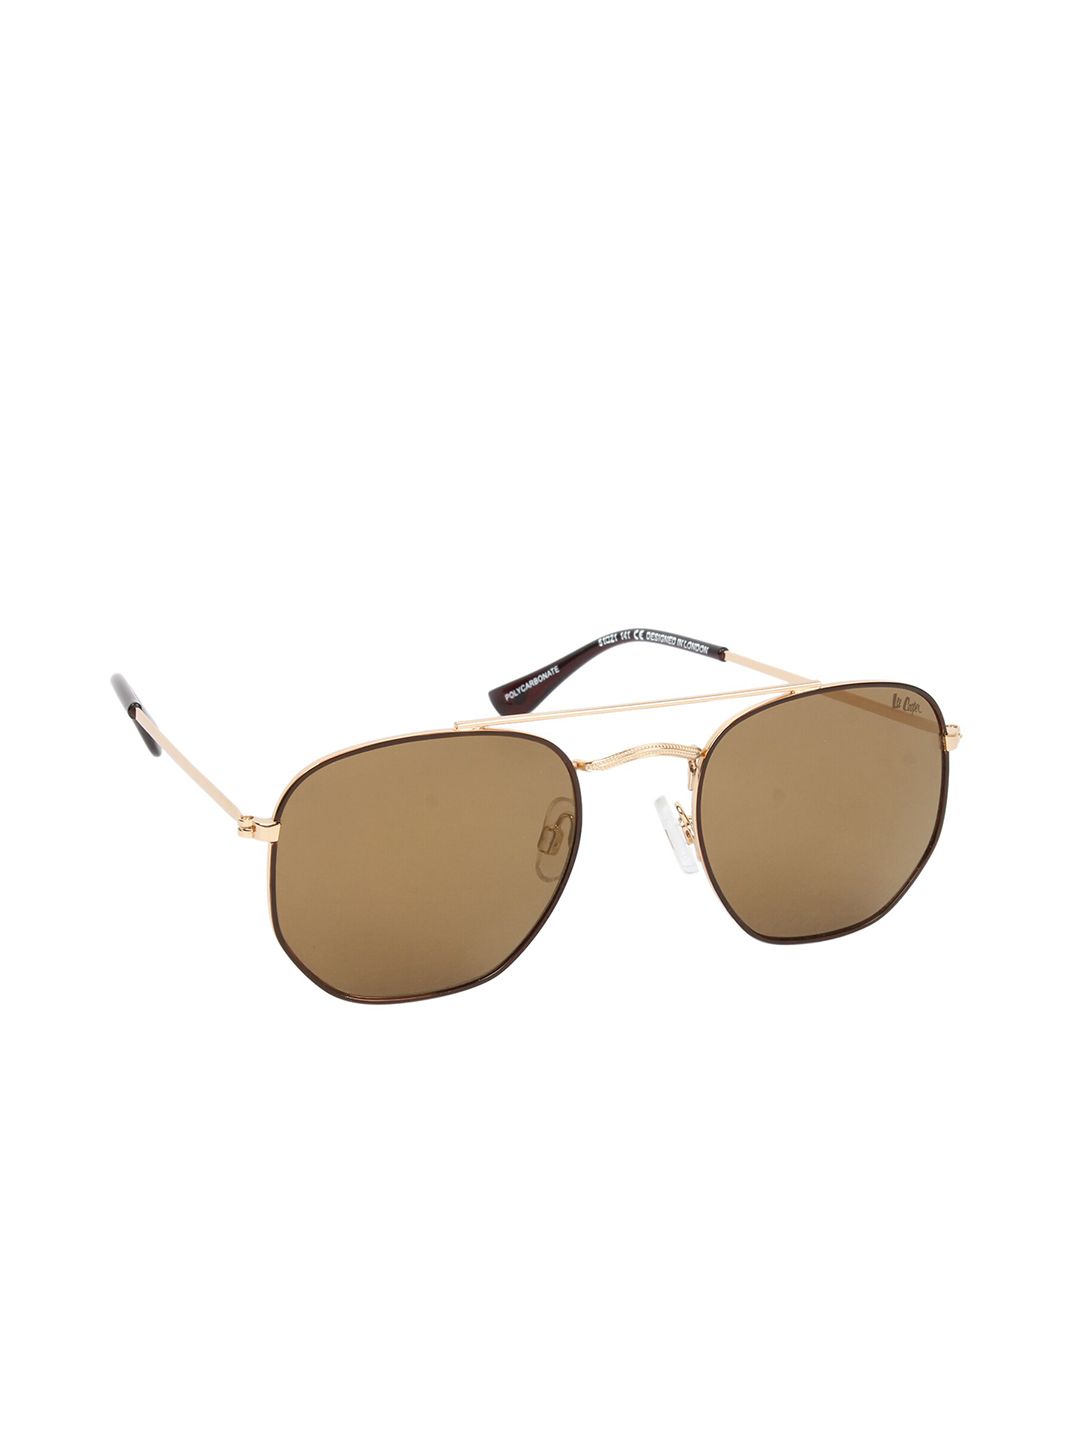 Lee Cooper Unisex Brown Lens & Gold-Toned Round UV Protected Lens Sunglasses Price in India